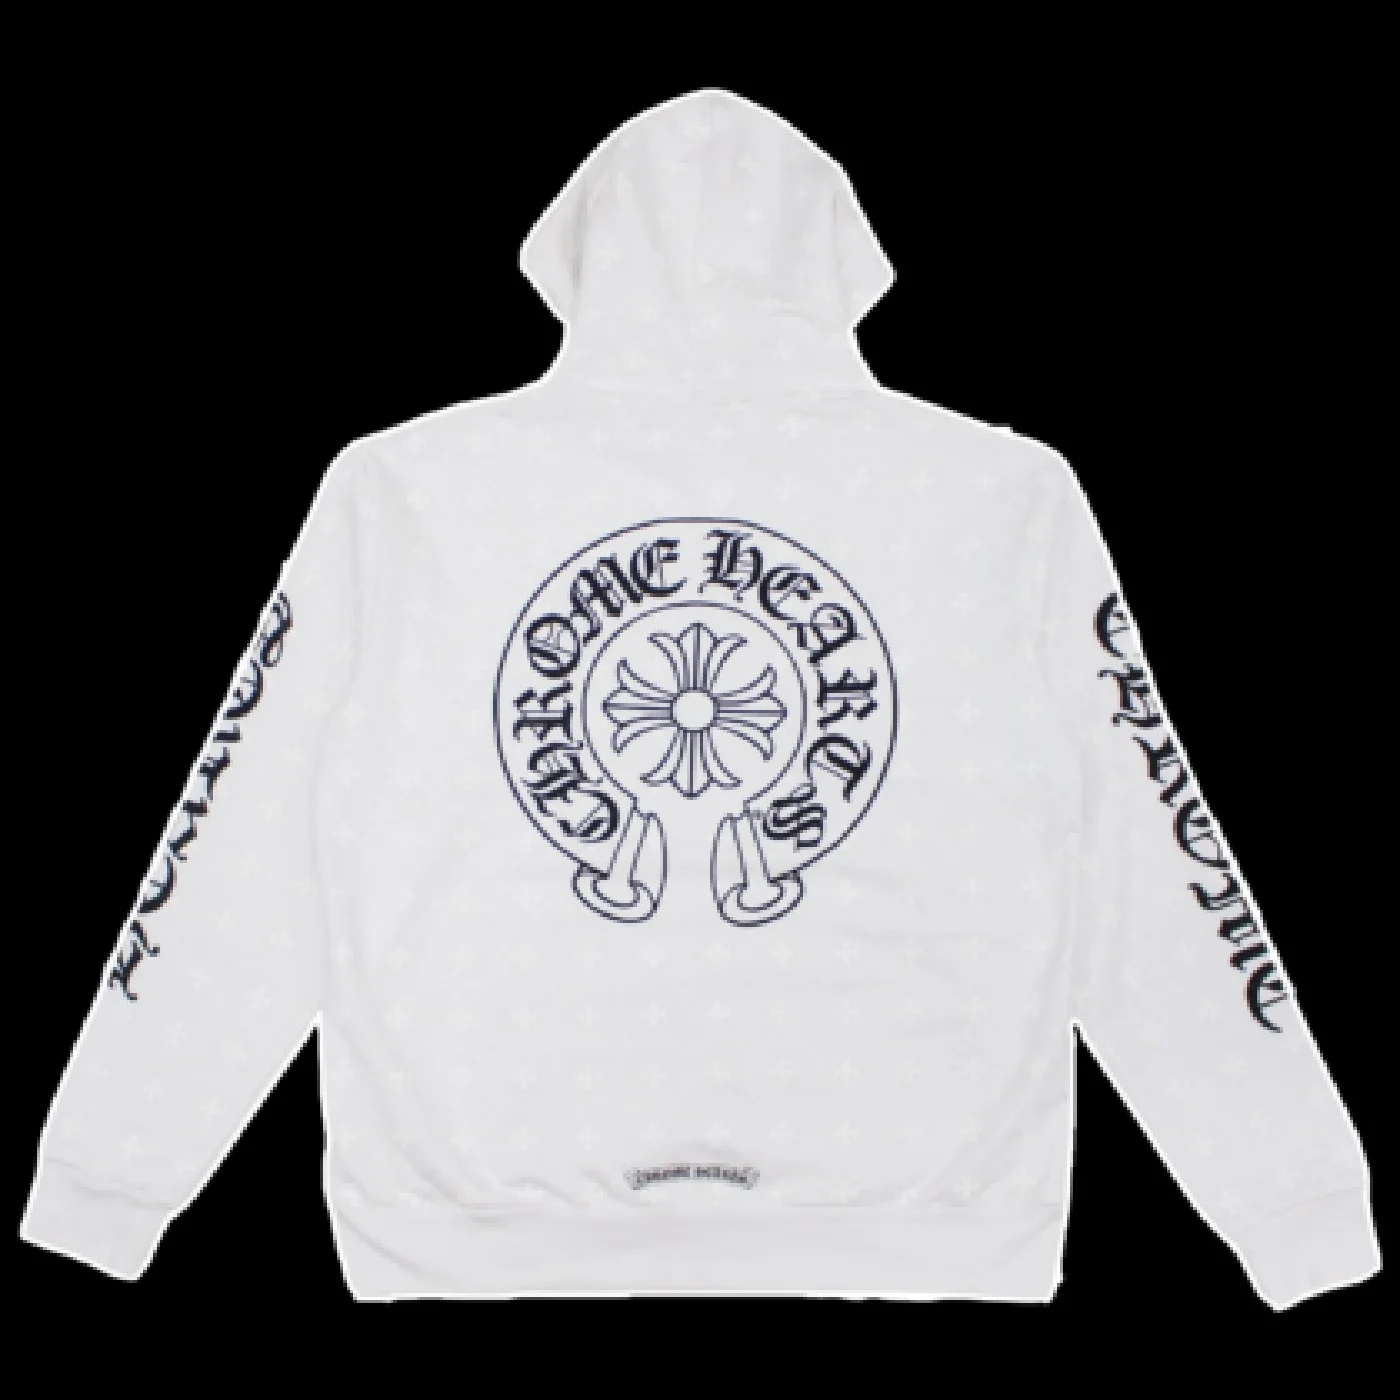 Where to buy chrome hearts clothing online